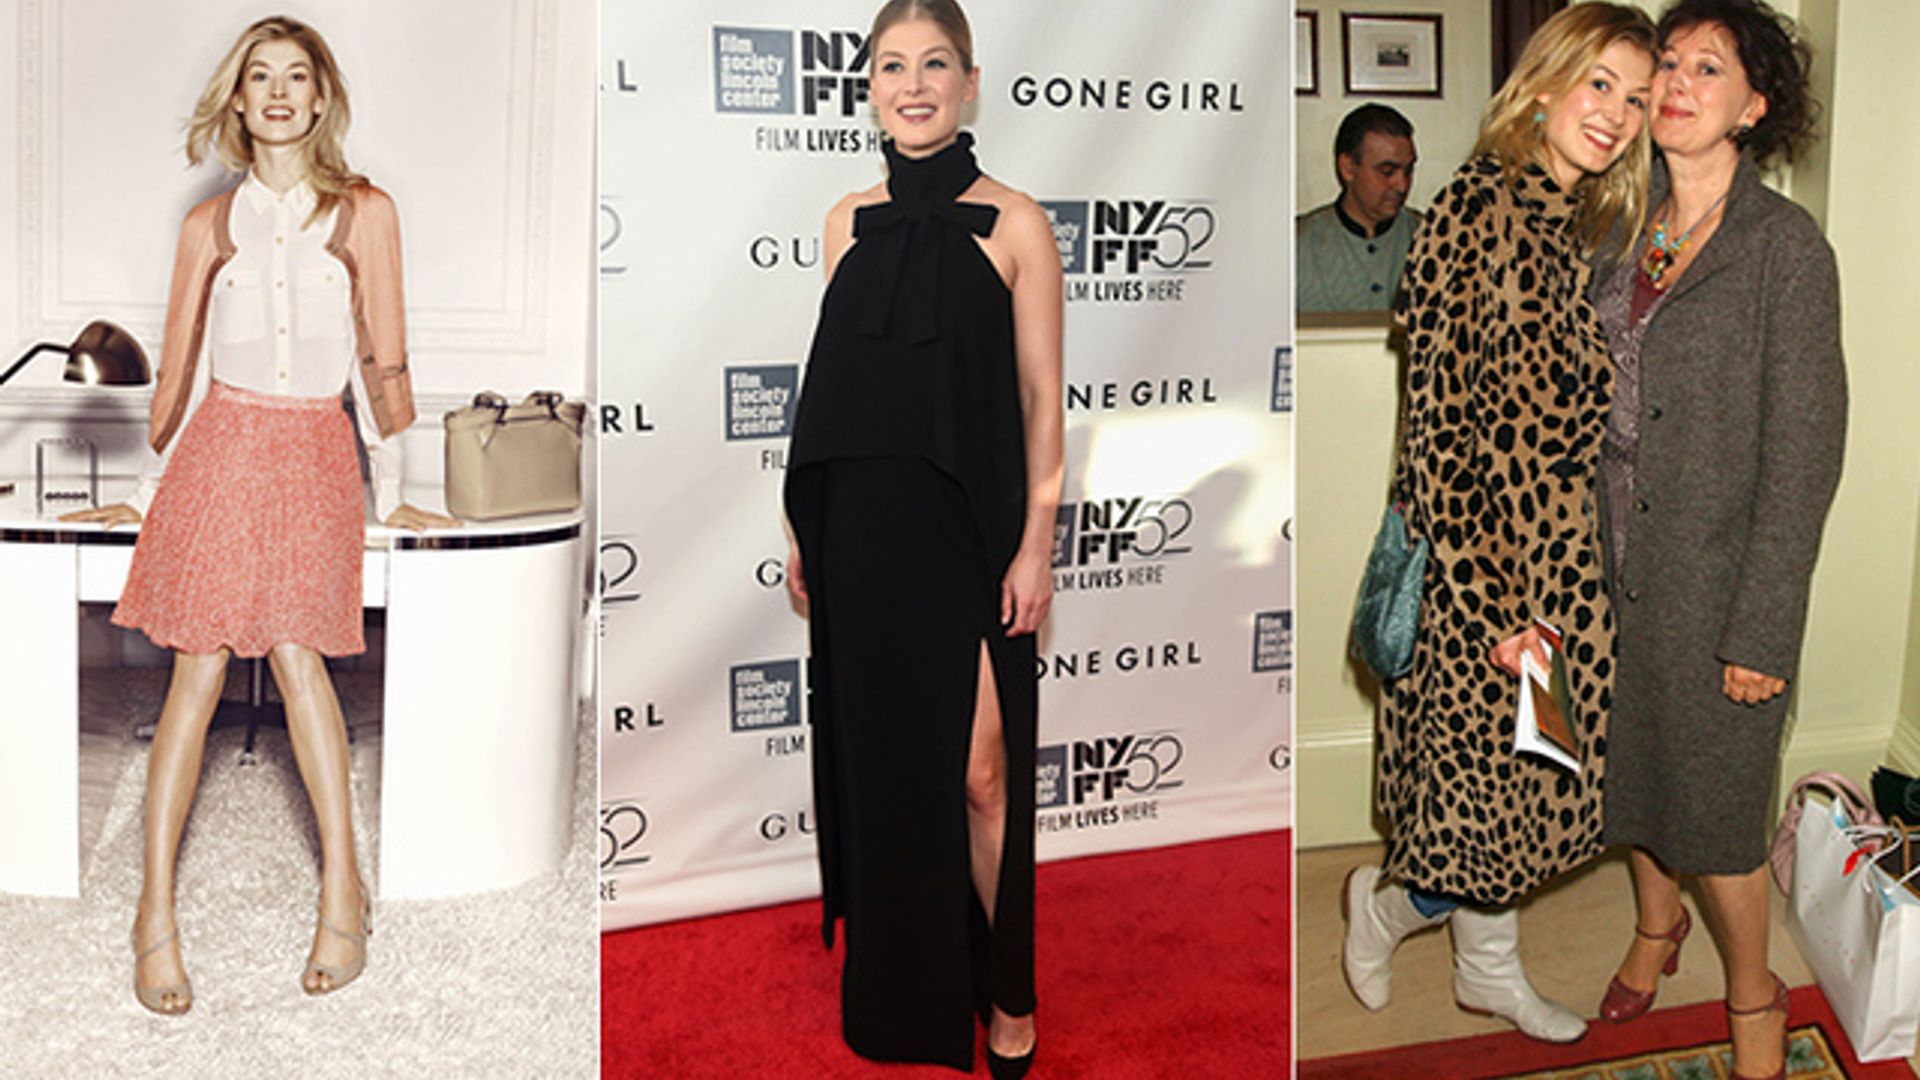 10 fun facts about 'Gone Girl' star Rosamund Pike